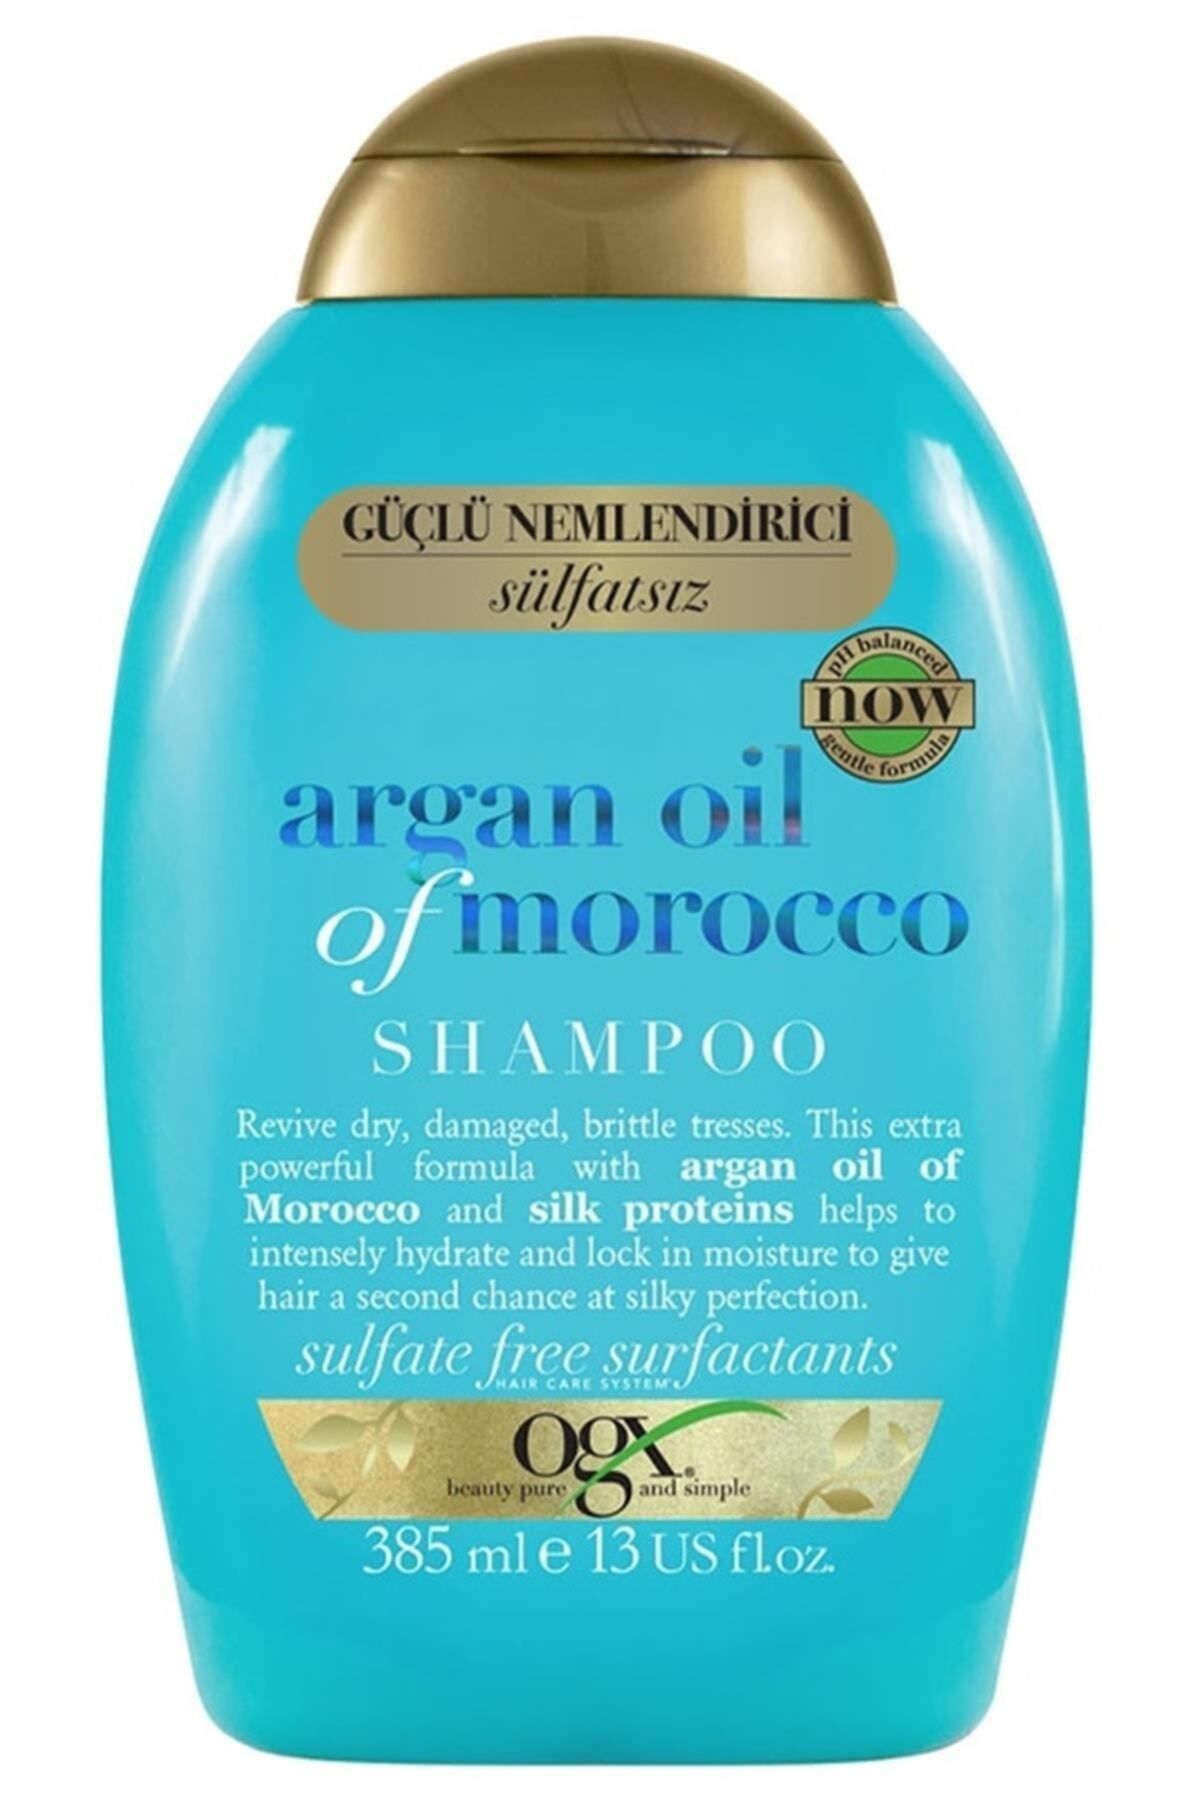 OGX EXTRA STRONG MOISTURIZING AND REVIVAL SHAMPOO SPECİAL SPLİT HAİR 385 ML KEYON983